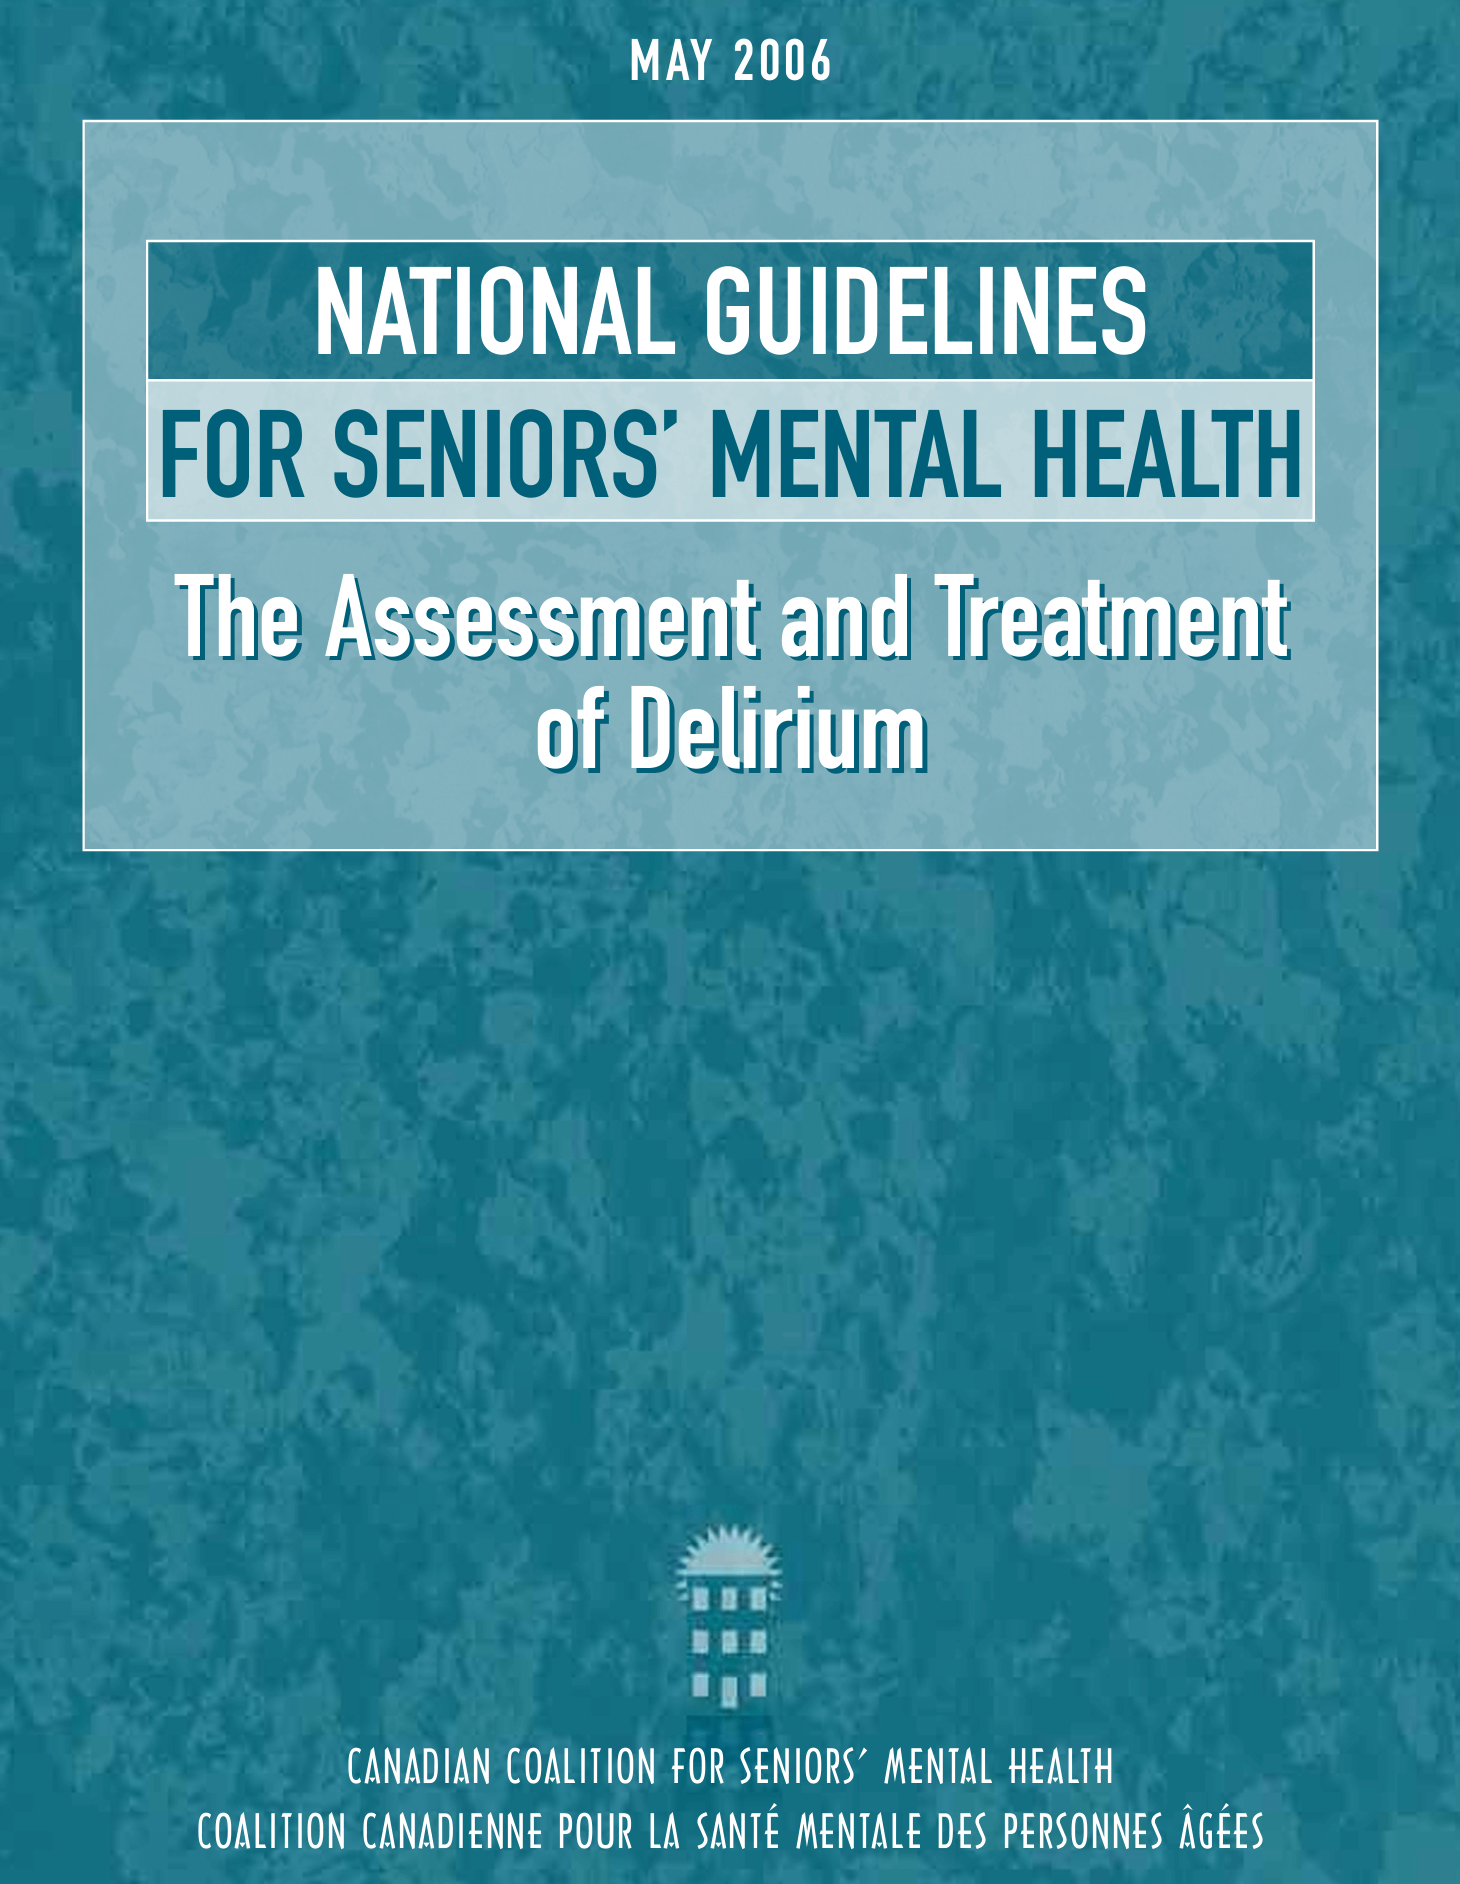 The cover for the National Guidelines for Delirium in older adults cover with a blue colour and granite-style pattern overlay.